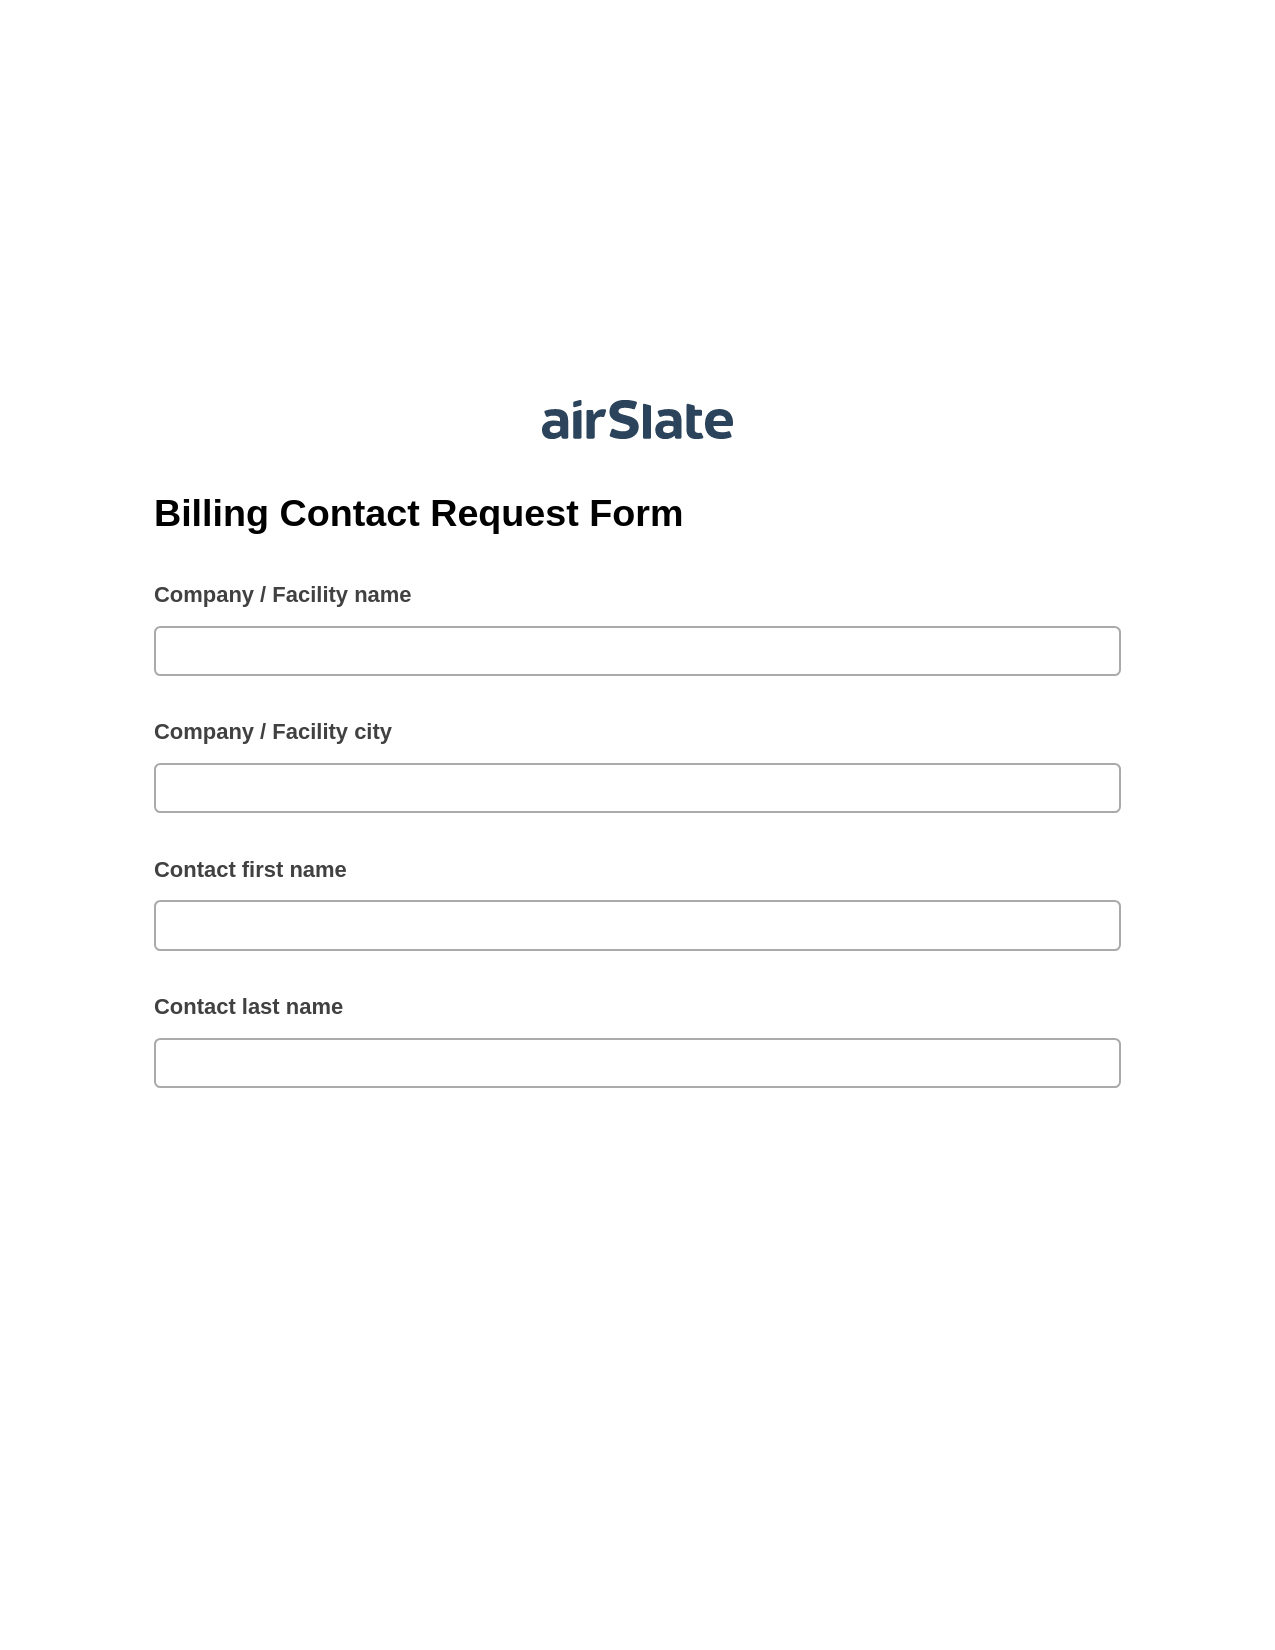 Billing Contact Request Form Pre-fill Slate from MS Dynamics 365 Records Bot, Slack Notification Bot, Google Drive Bot